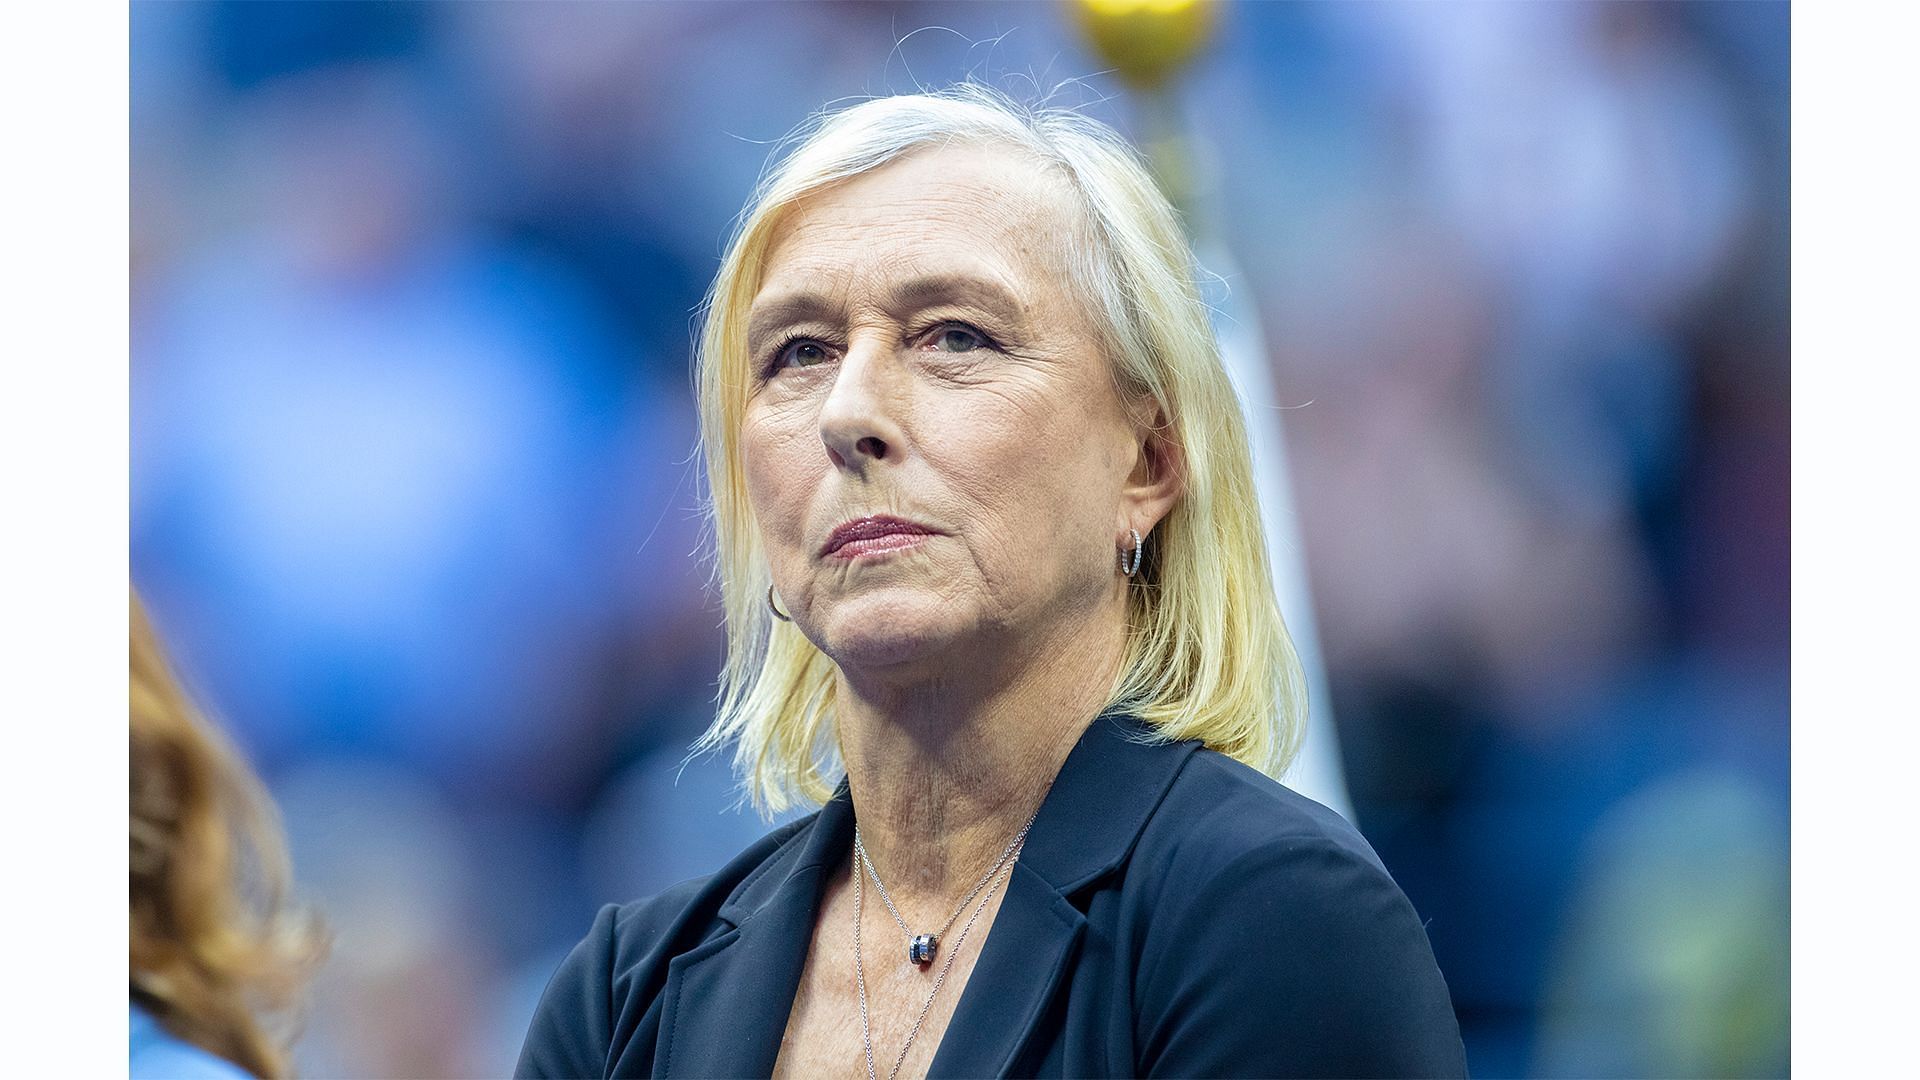 Martina Navratilova shocked after learning people being beheaded in Kfar Aza amidst ongoing Israel-Palestine conflict 